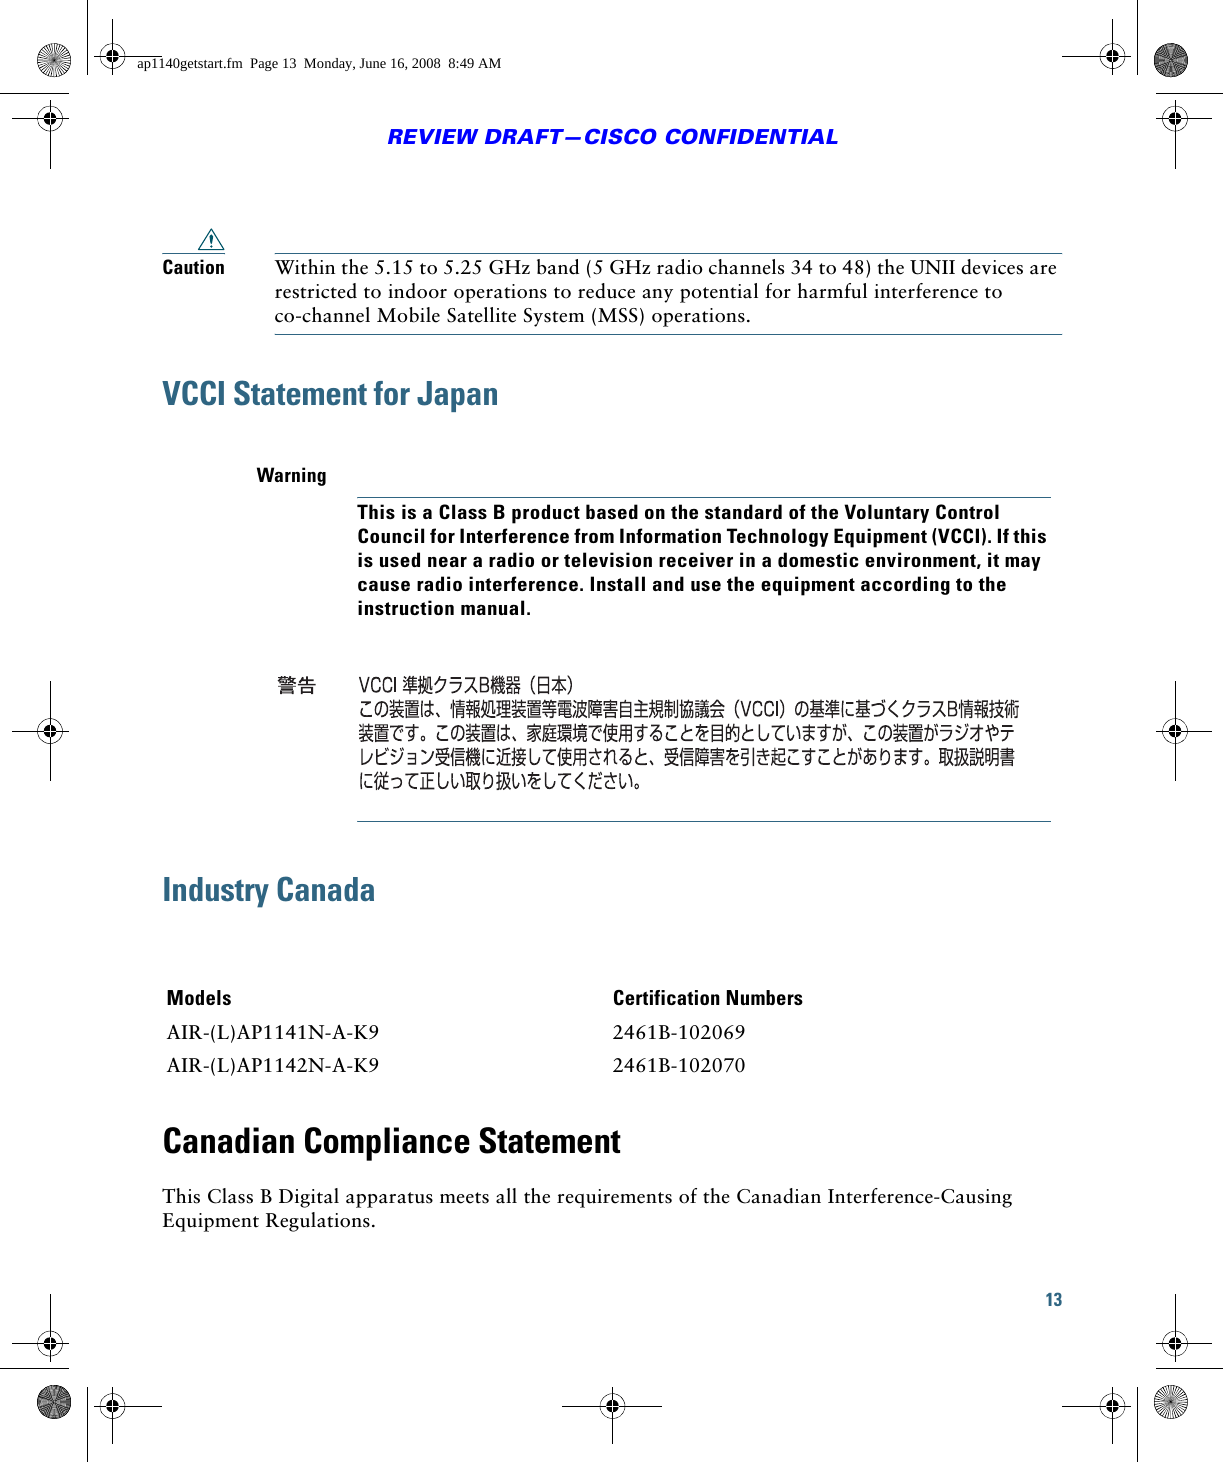 13REVIEW DRAFT—CISCO CONFIDENTIALCaution Within the 5.15 to 5.25 GHz band (5 GHz radio channels 34 to 48) the UNII devices are restricted to indoor operations to reduce any potential for harmful interference to co-channel Mobile Satellite System (MSS) operations.VCCI Statement for JapanIndustry CanadaCanadian Compliance StatementThis Class B Digital apparatus meets all the requirements of the Canadian Interference-Causing Equipment Regulations.WarningThis is a Class B product based on the standard of the Voluntary Control Council for Interference from Information Technology Equipment (VCCI). If this is used near a radio or television receiver in a domestic environment, it may cause radio interference. Install and use the equipment according to the instruction manual.Models Certification NumbersAIR-(L)AP1141N-A-K9 2461B-102069AIR-(L)AP1142N-A-K9 2461B-102070ap1140getstart.fm  Page 13  Monday, June 16, 2008  8:49 AM